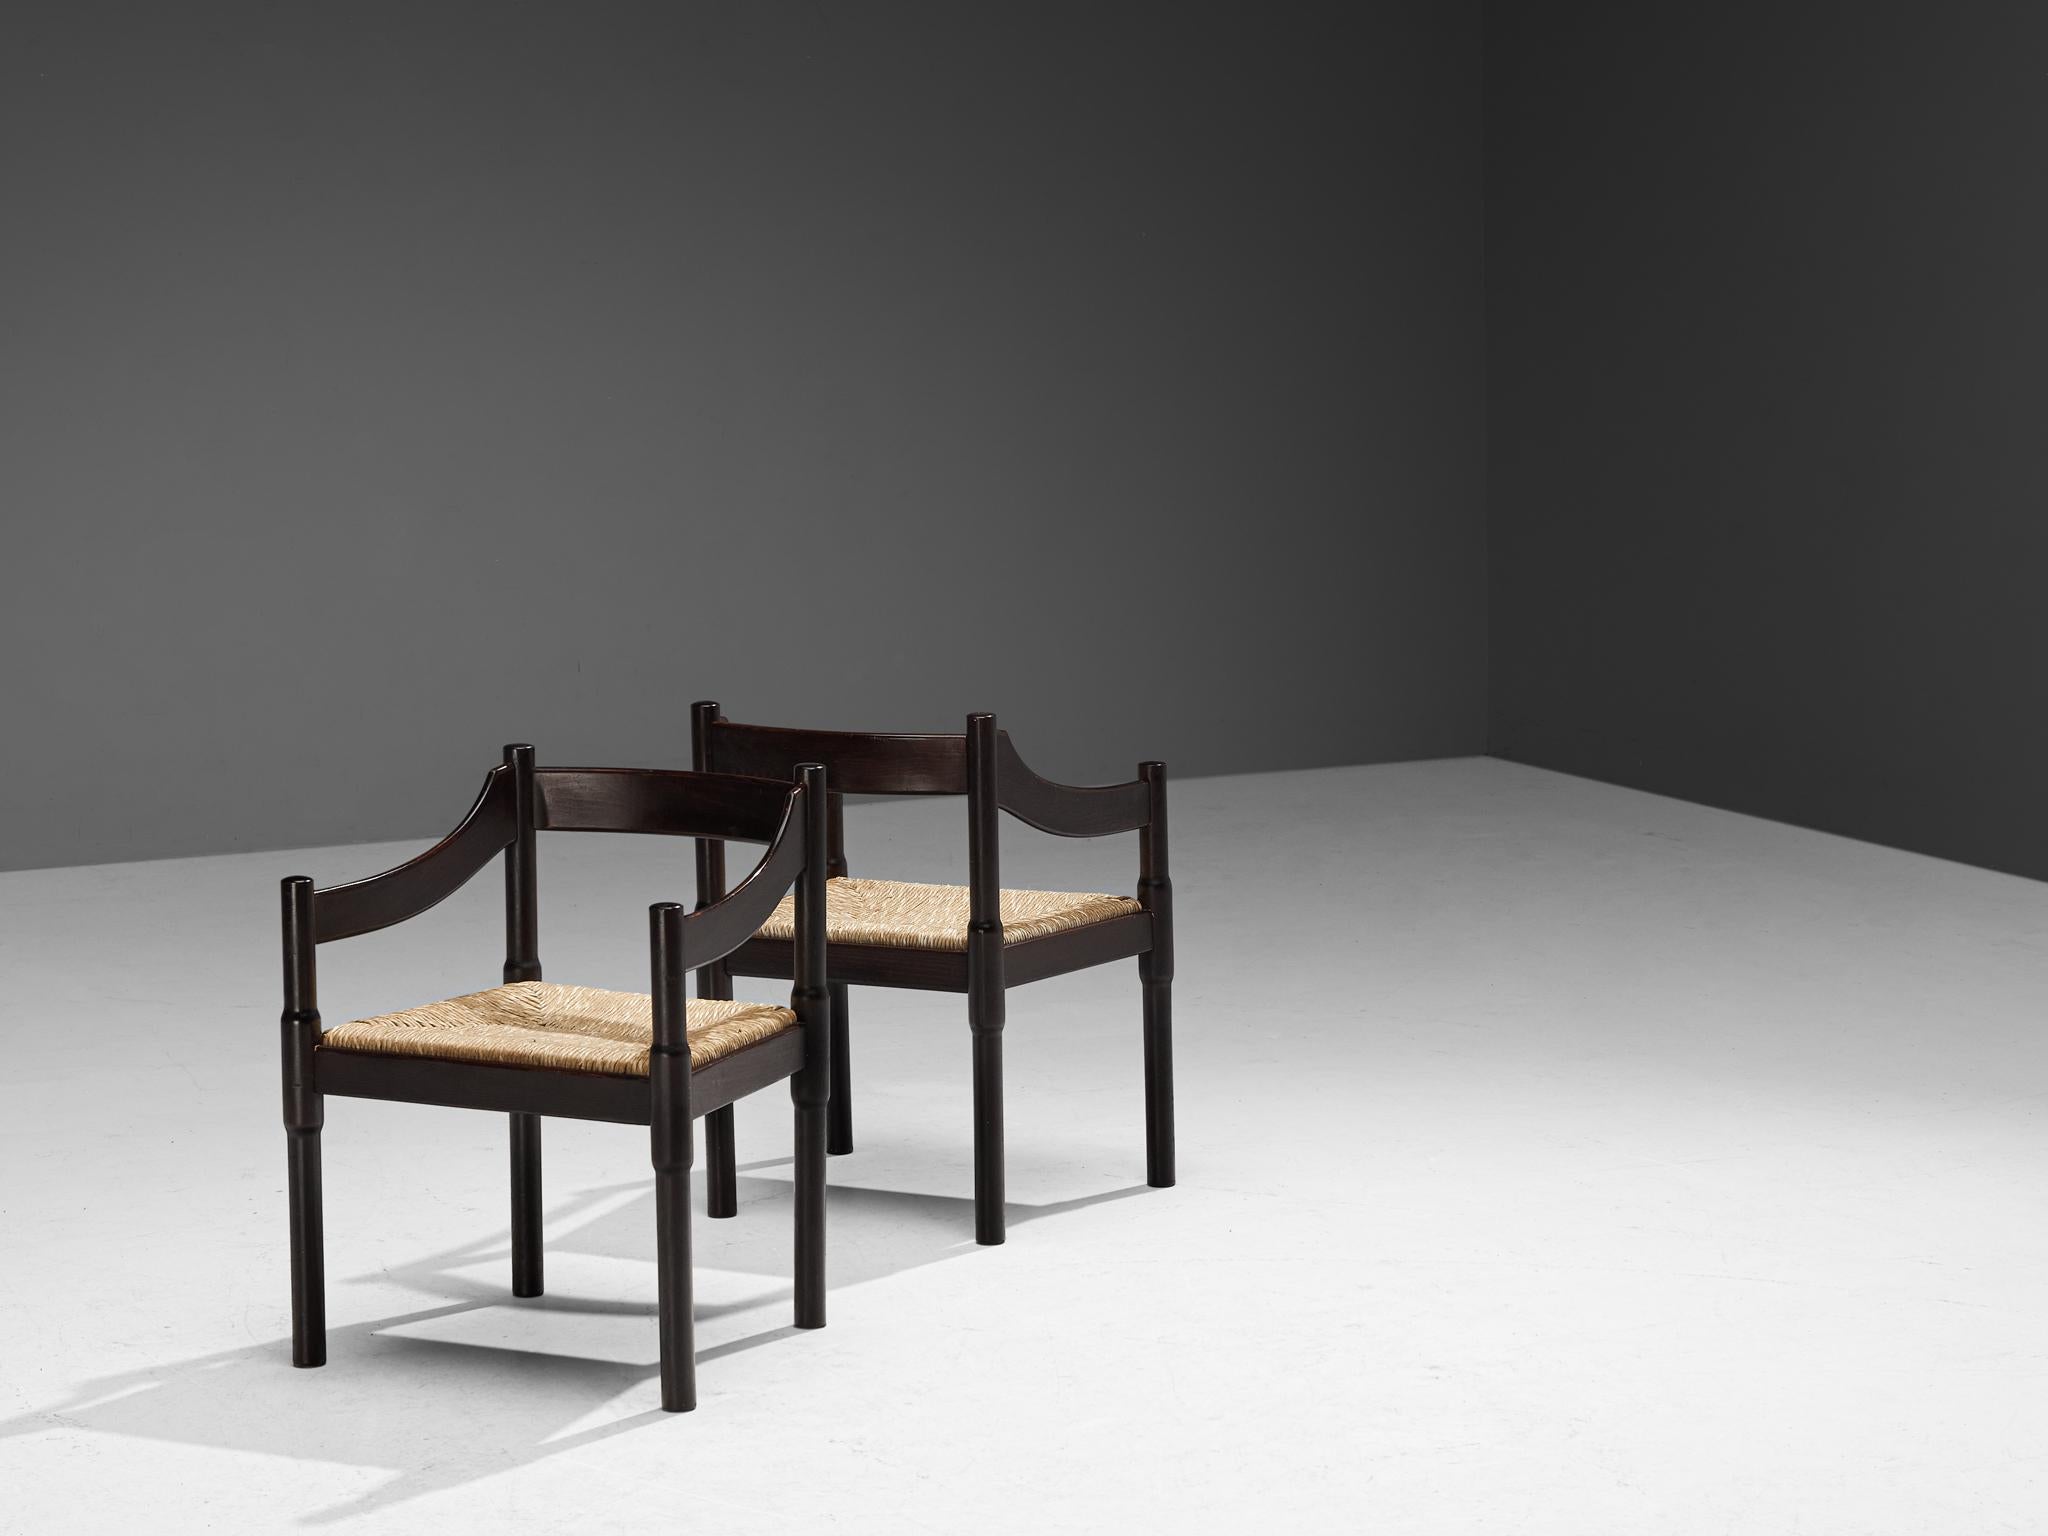 Vico Magistretti, pair of ‘Carimate’ armchairs, model '892', stained beech, rush, Italy, design 1963

The ‘Carimate’ chair is one of Vico Magistretti’s most famous chairs. Originally designed in a red color for the ‘Carimate Golf Club’ in Italy